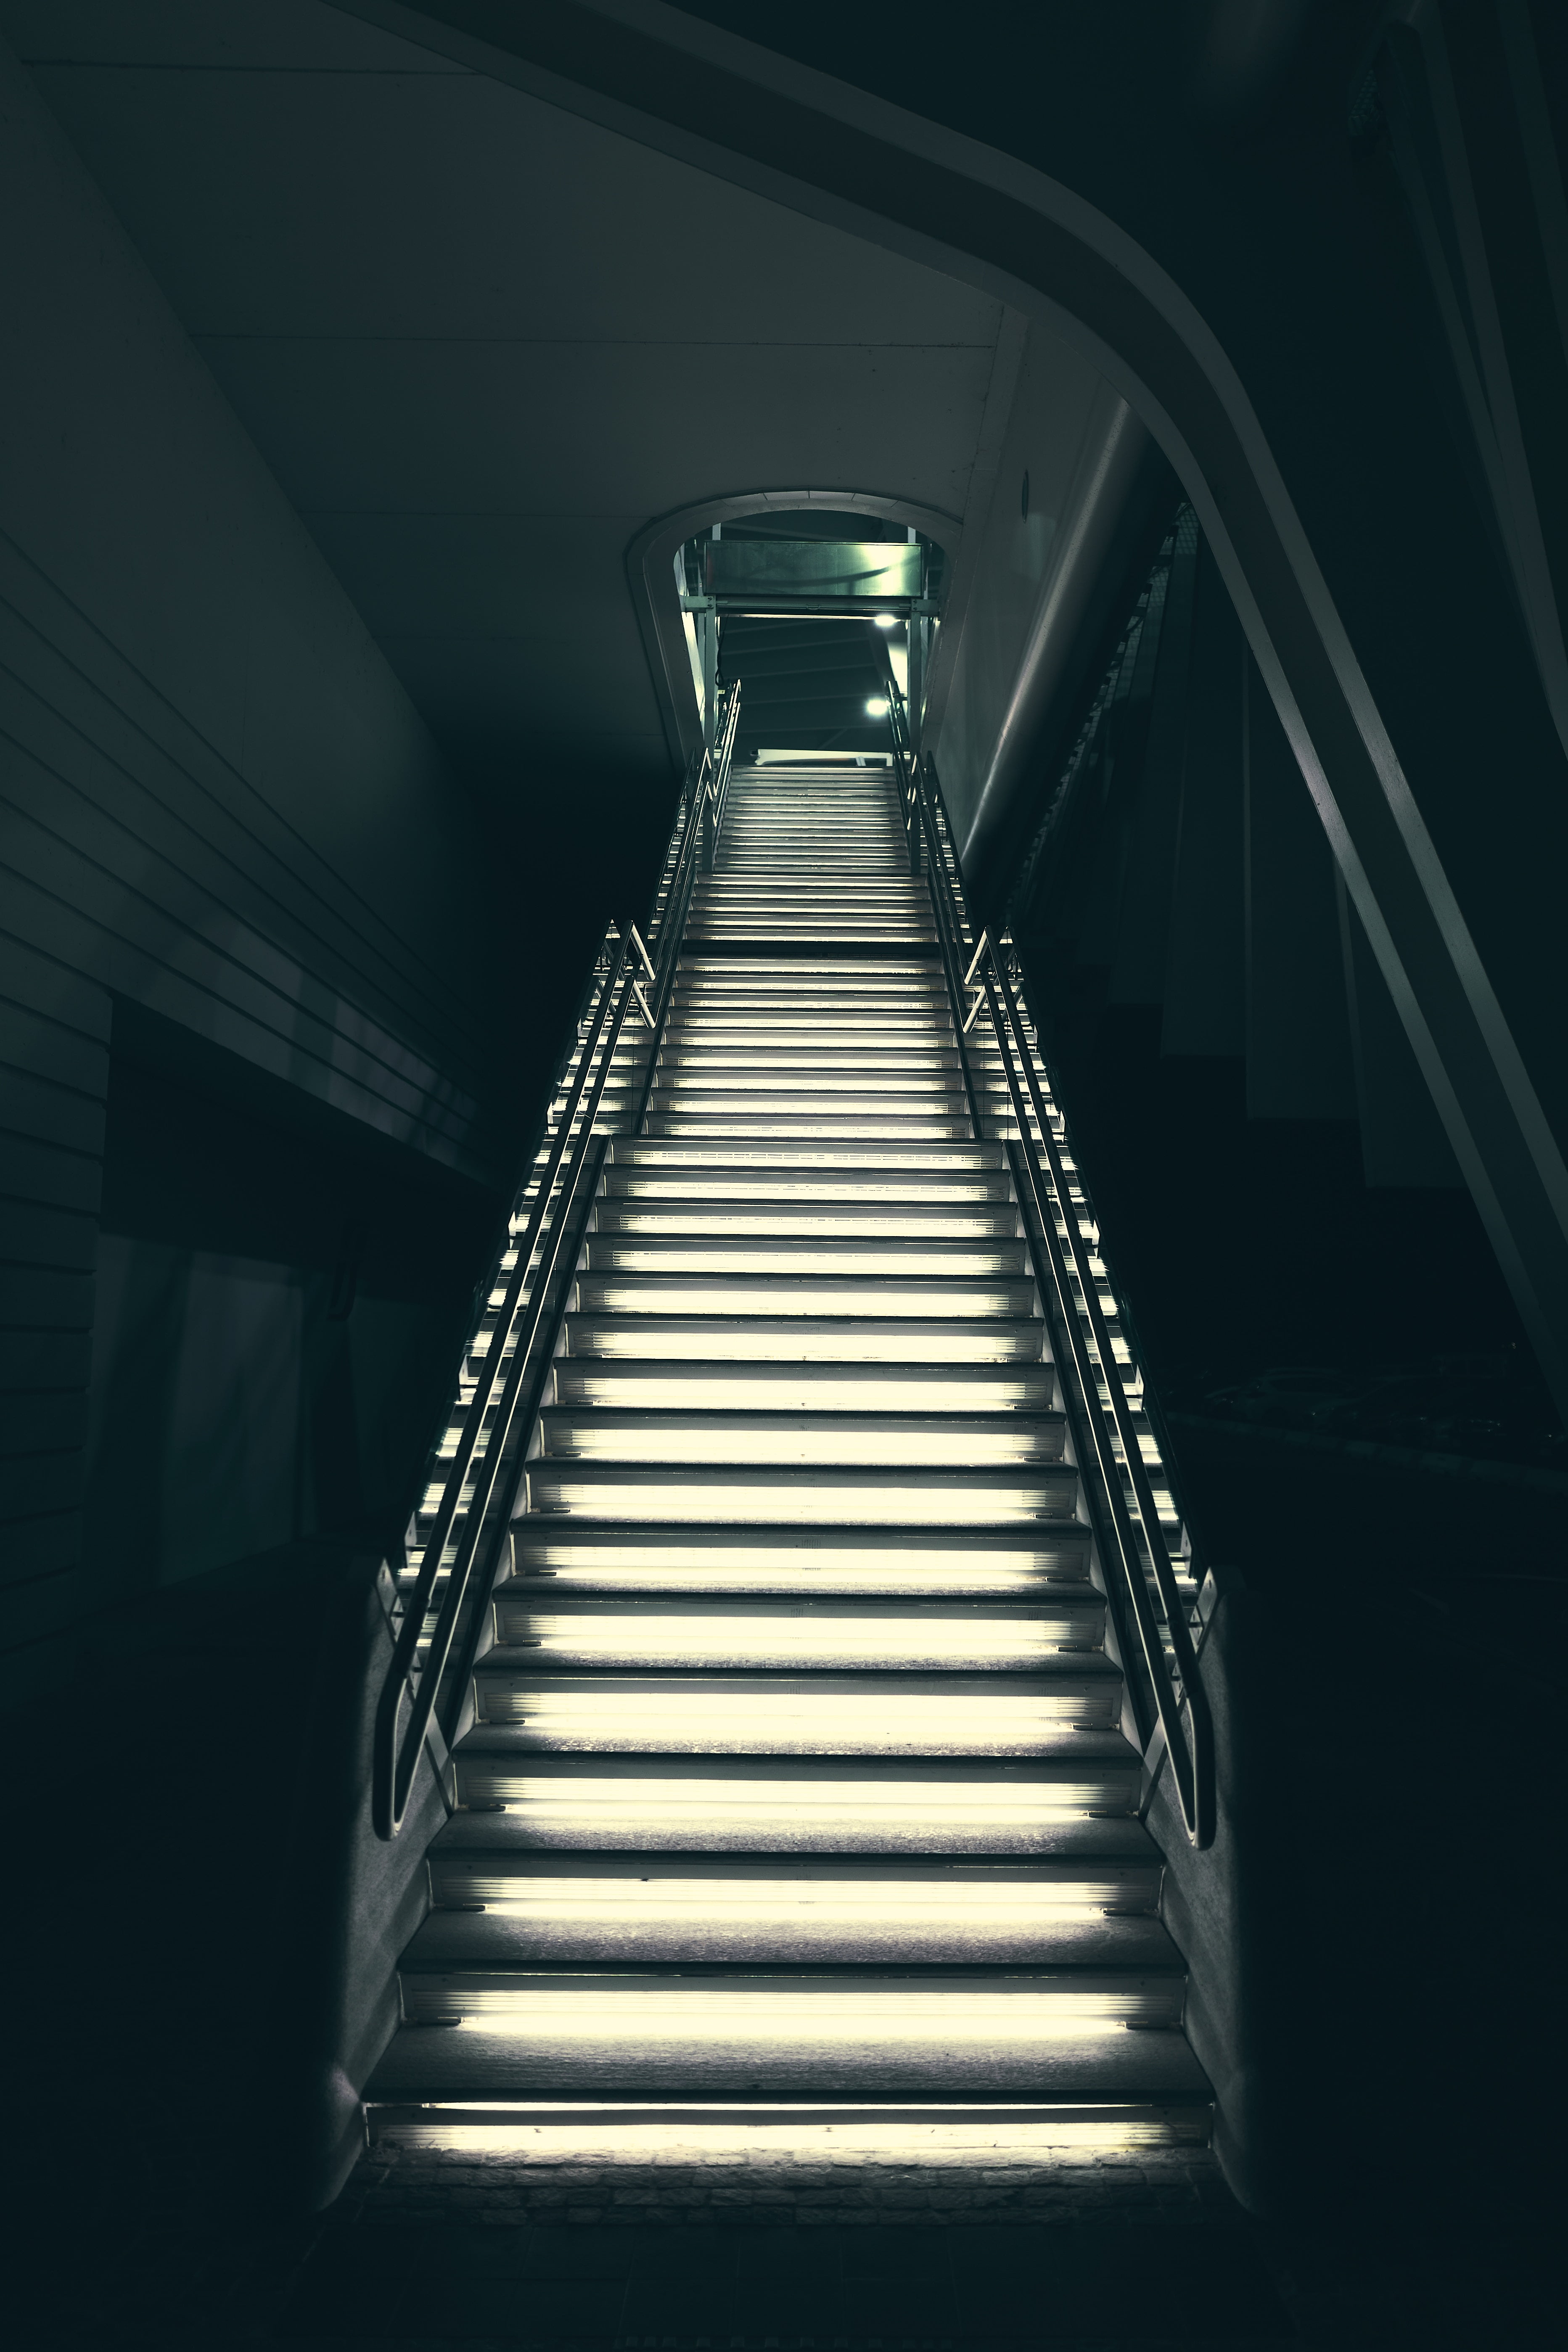 silver stair and rail, stairs, lighting, exit, architecture, staircase